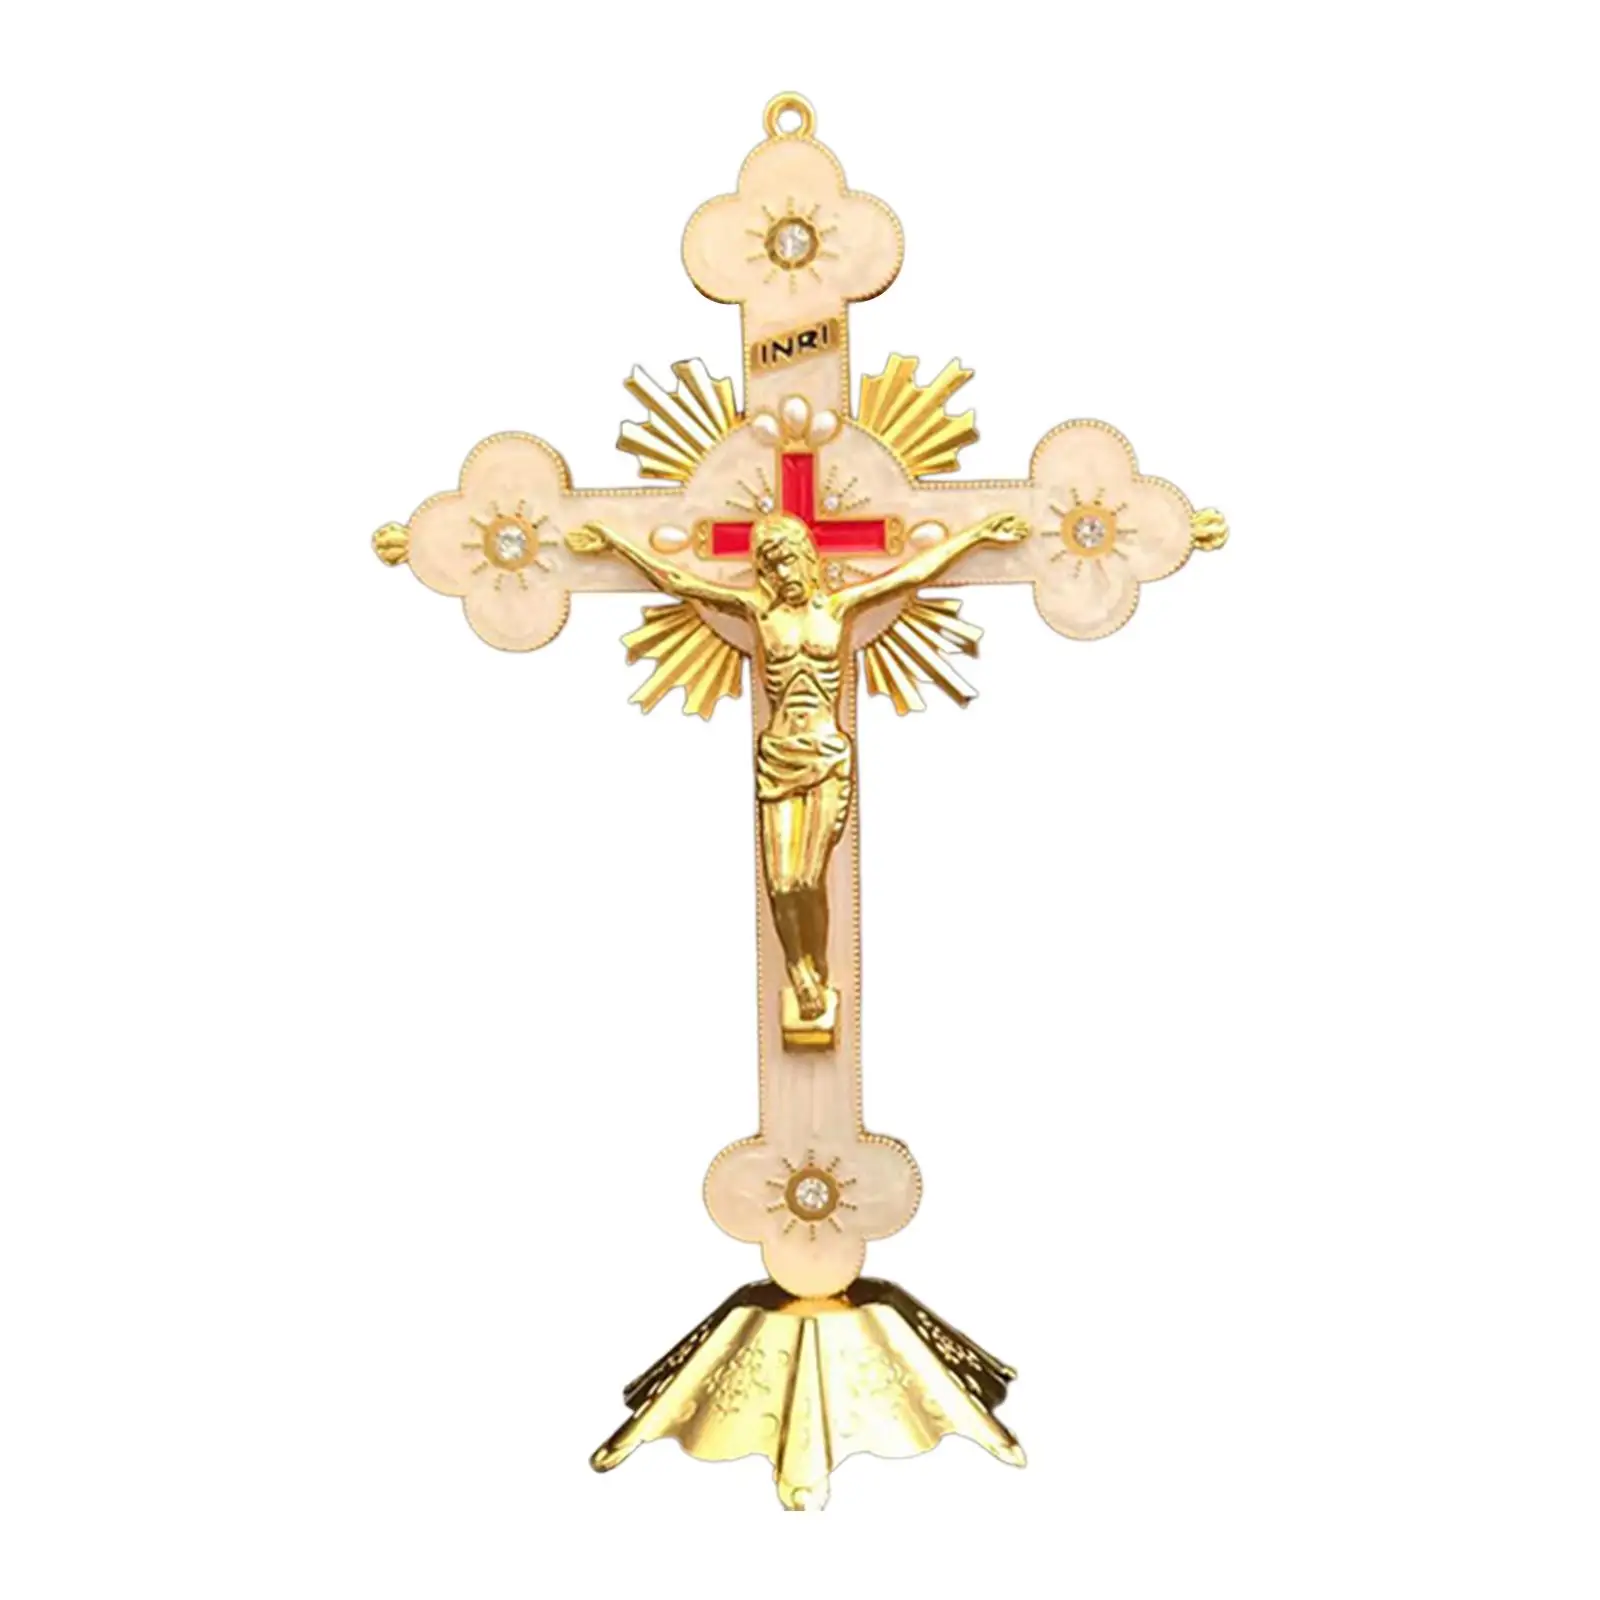 Standing Crucifix, Table Cross, Crucifix with Stand, Jesus Crucifix for Altar, Home Decor, Tabletop Decoration